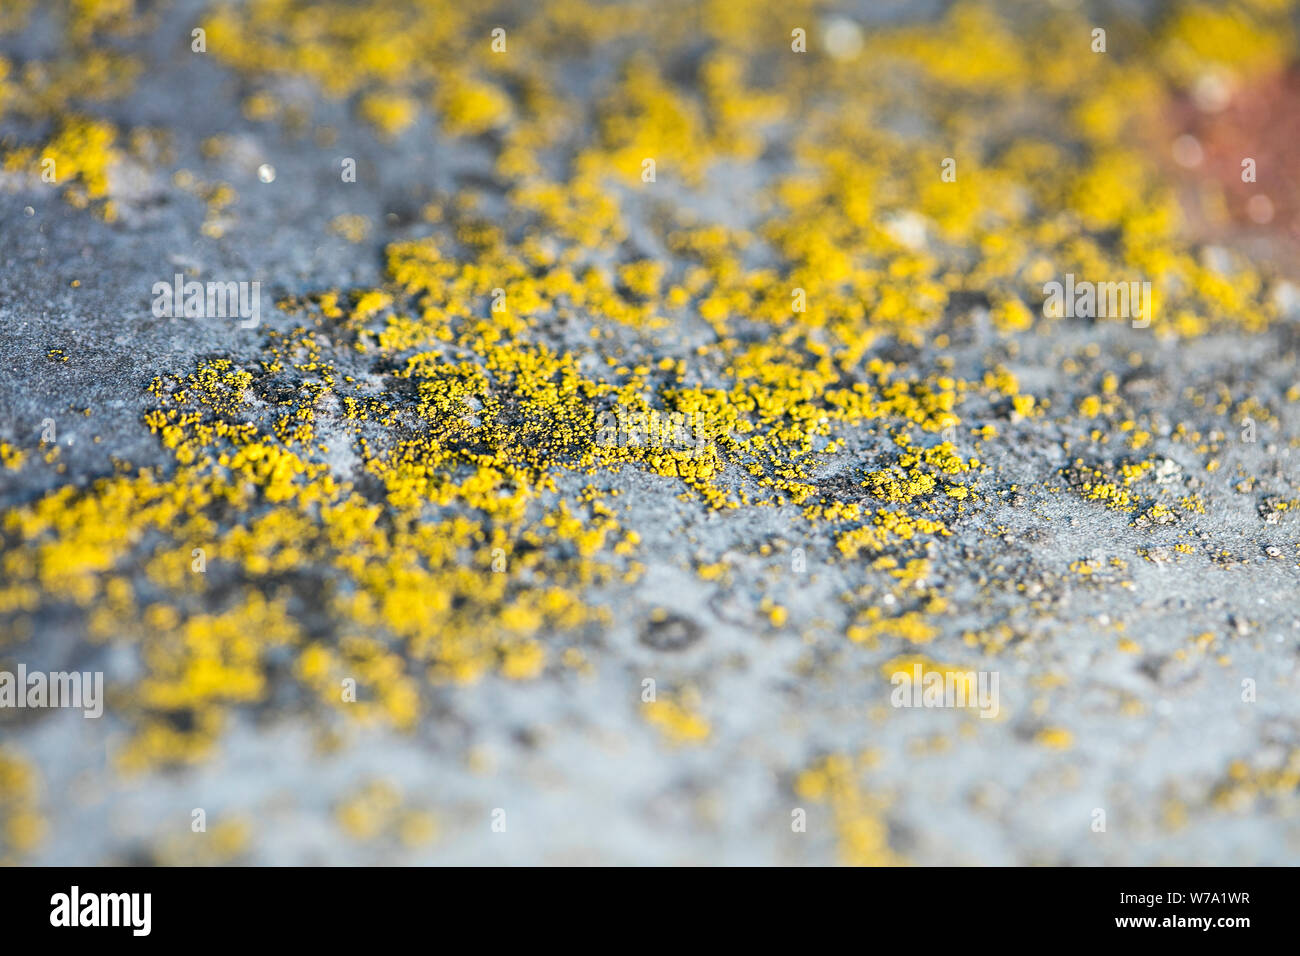 Yellow lichens on metal surface macro background fine art high quality prints products fifty megapixels Stock Photo